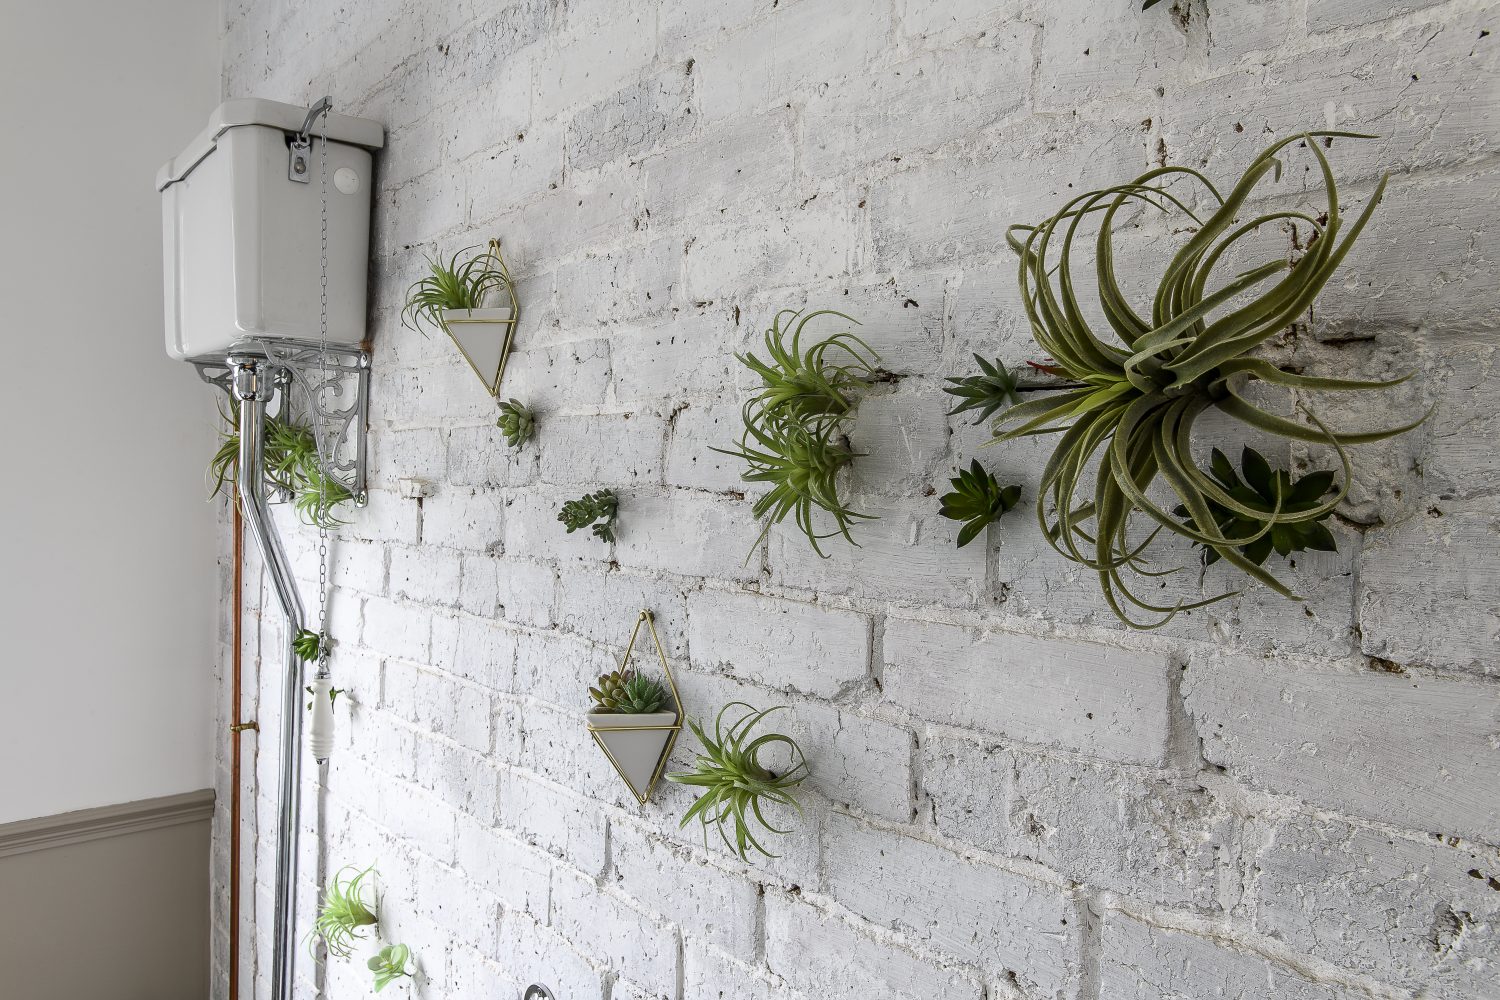 In the first floor loo, Morgan has painted the bare brickwork white and brought the space to life with faux succulents